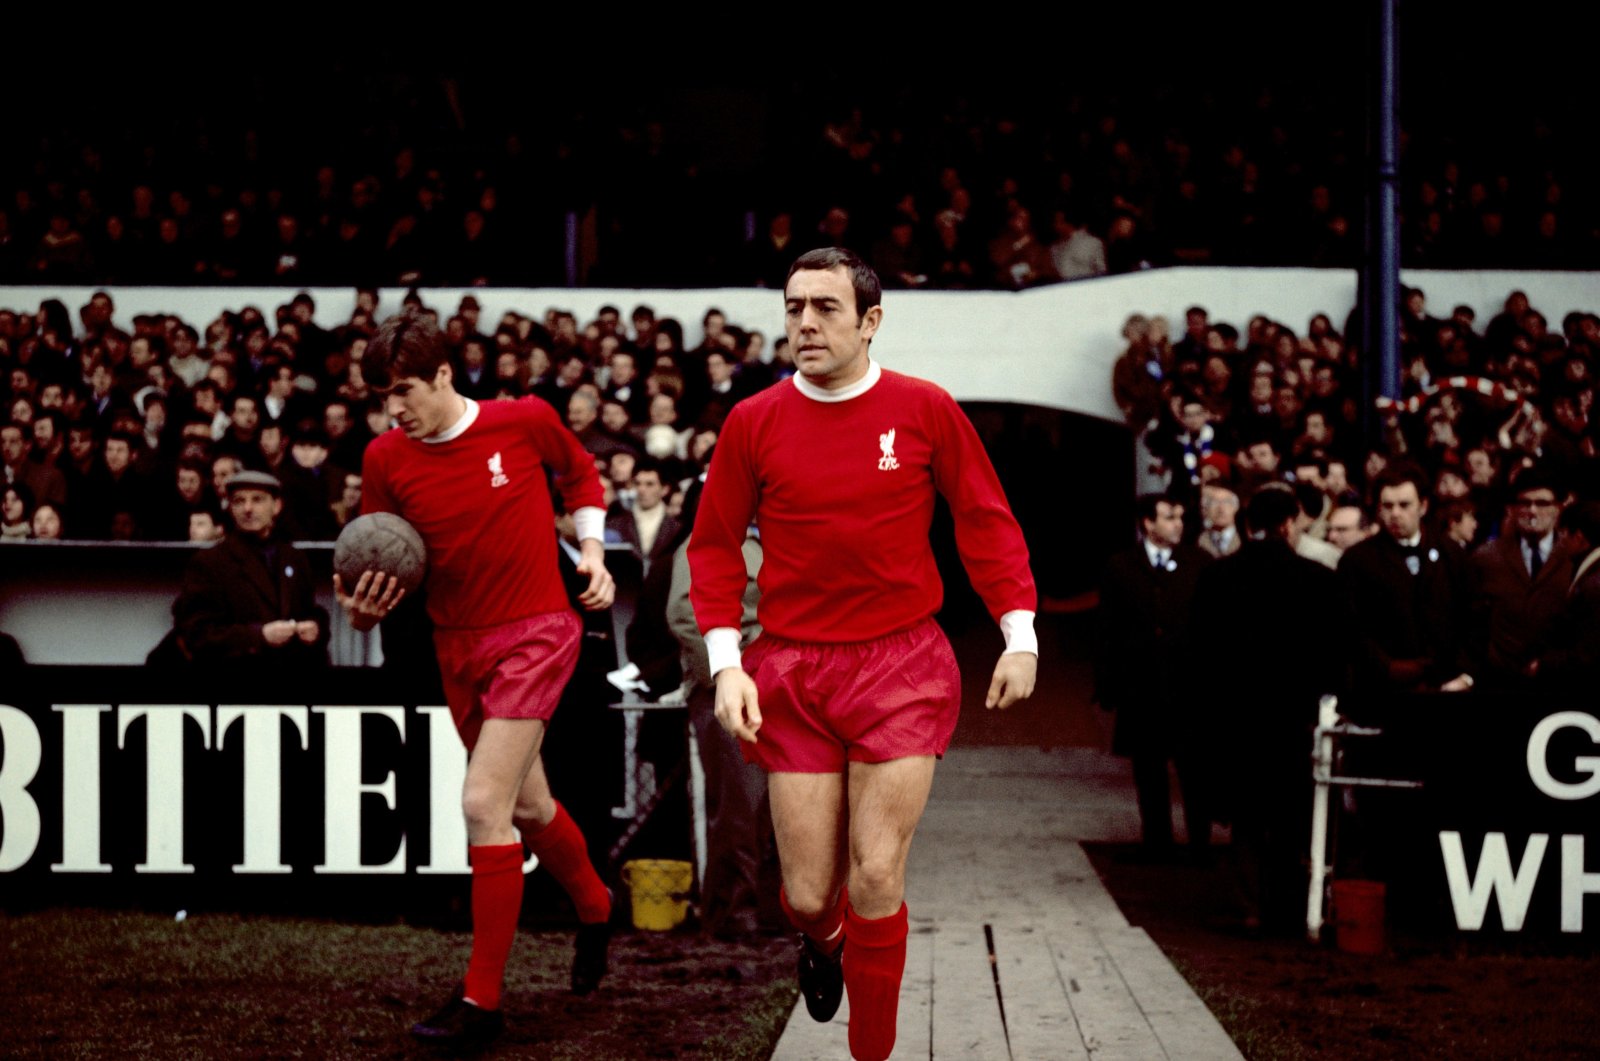 Liverpool's Ian St John (C) with Emlyn Hughes (L), in this file photo dated Jan. 18, 1969. (AP Photo)